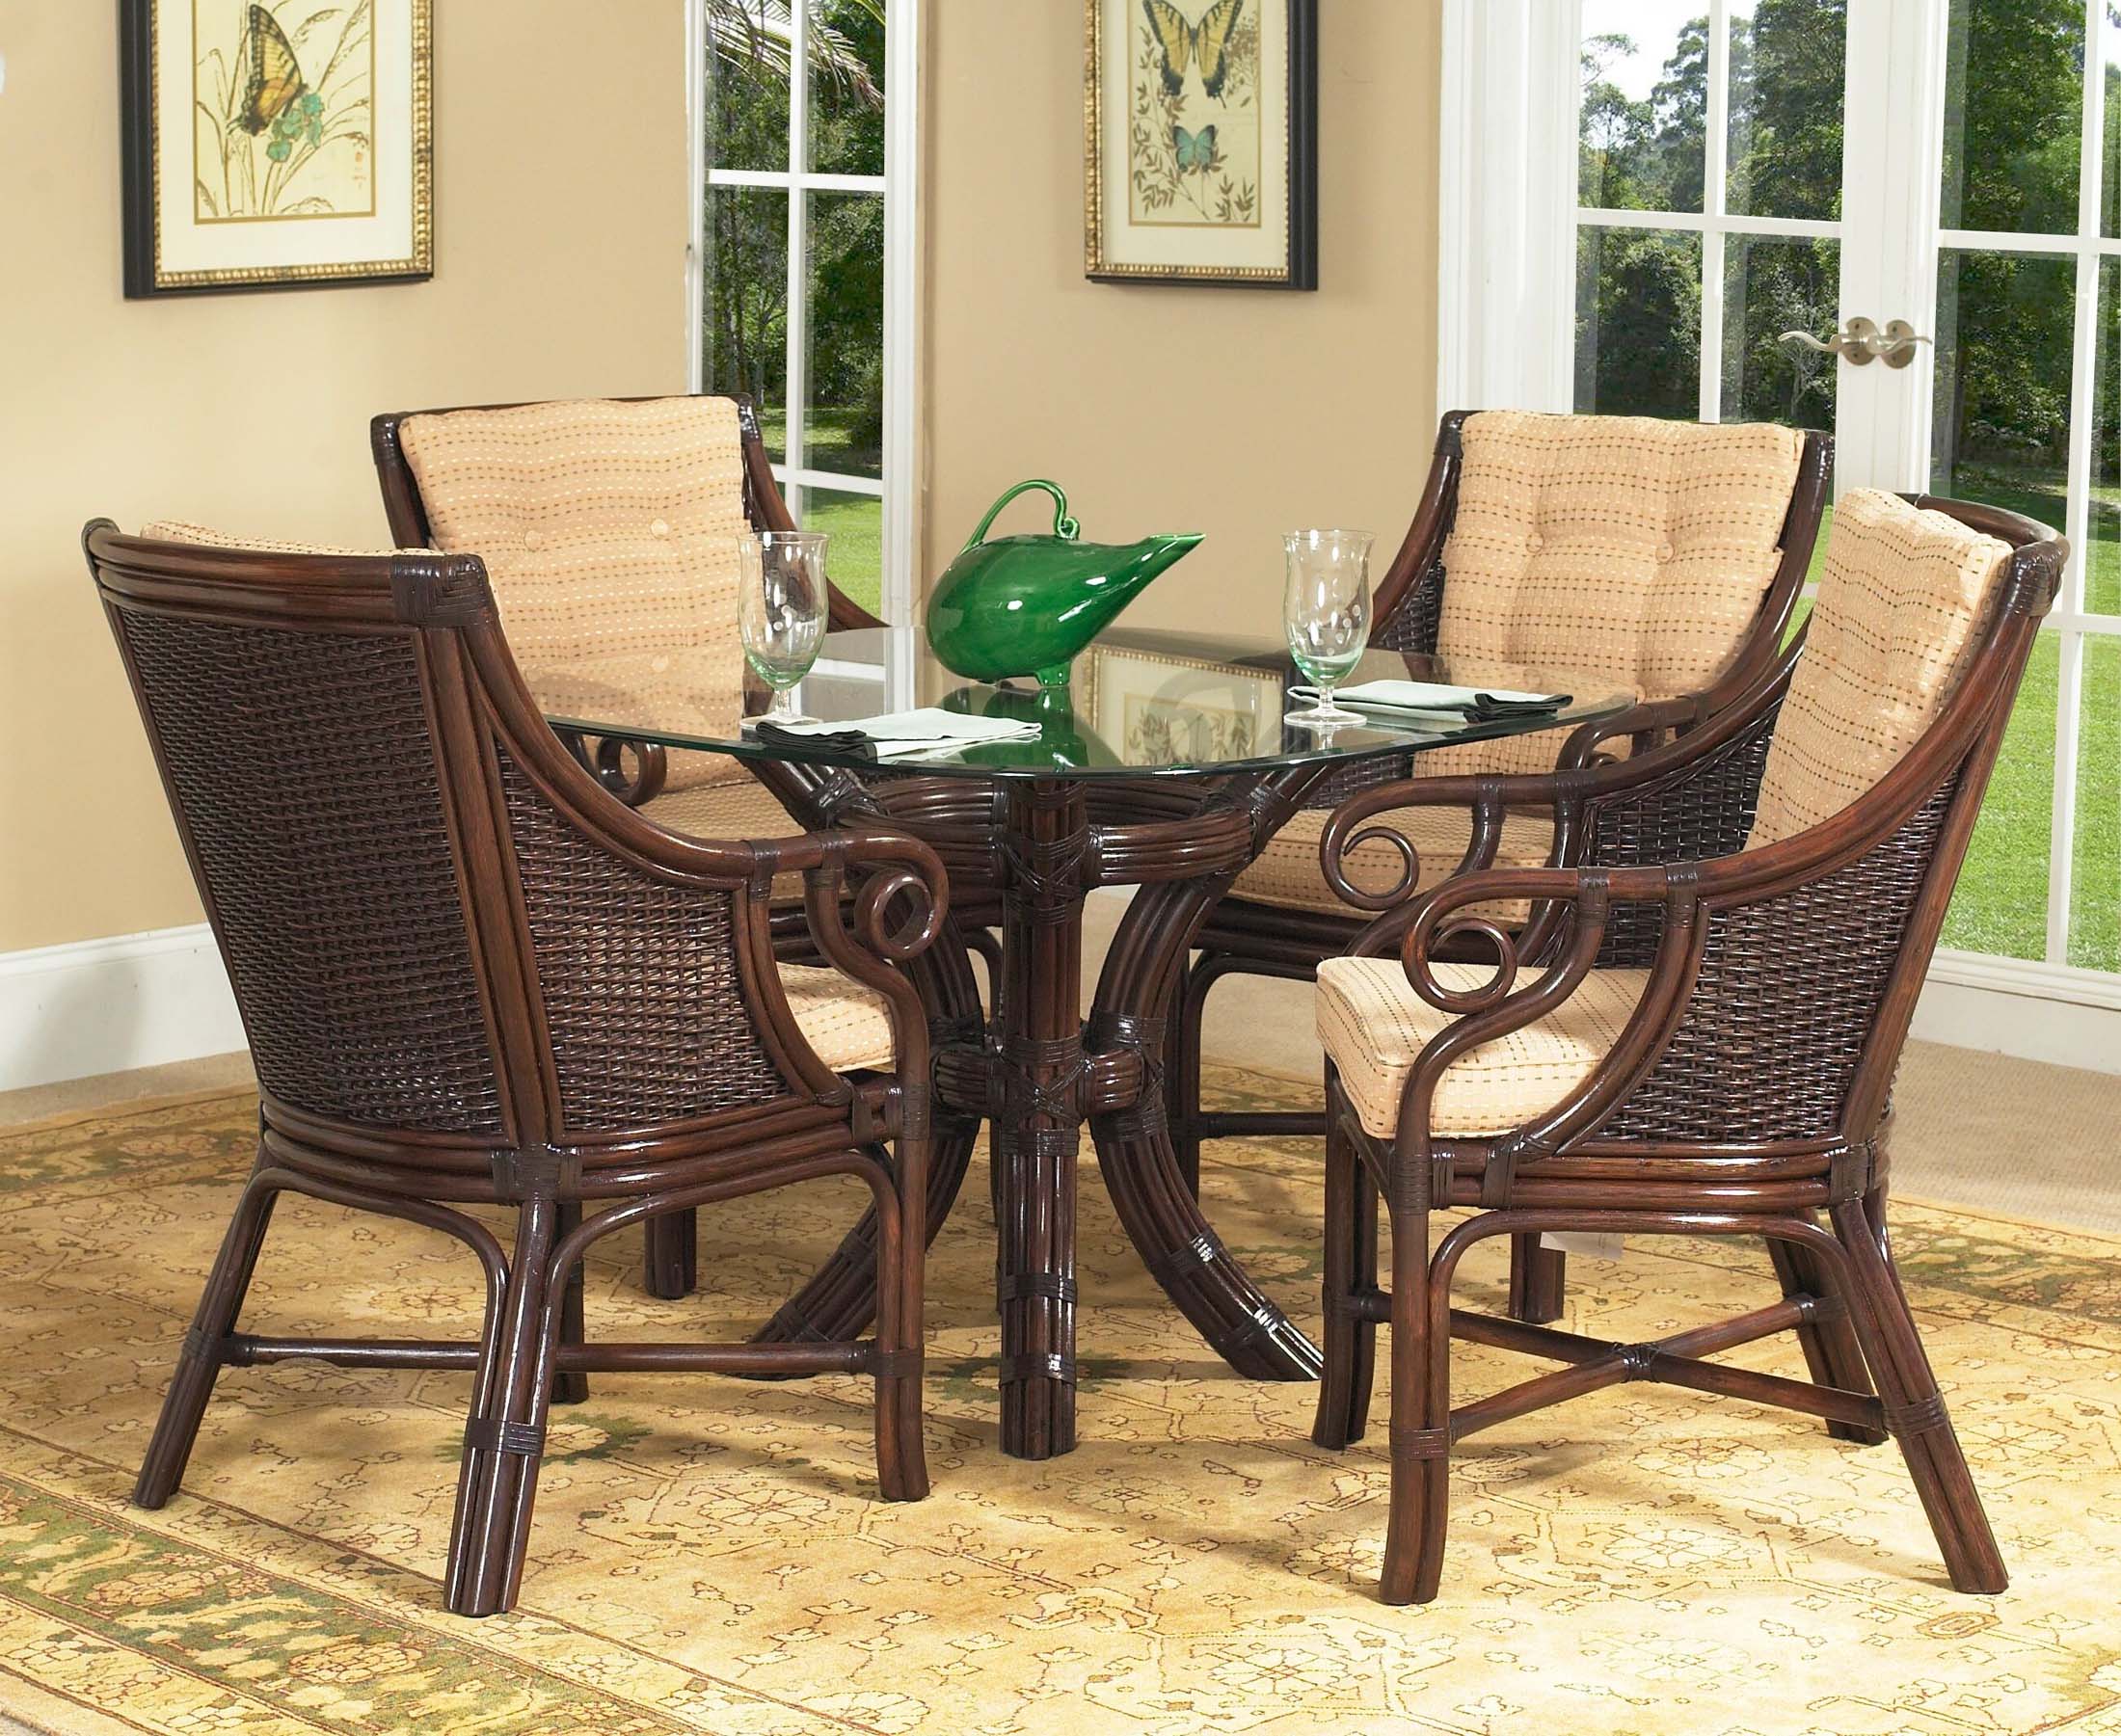 Windsor Wicker 6 Pc Dining Set from Classic Rattan Model 9805